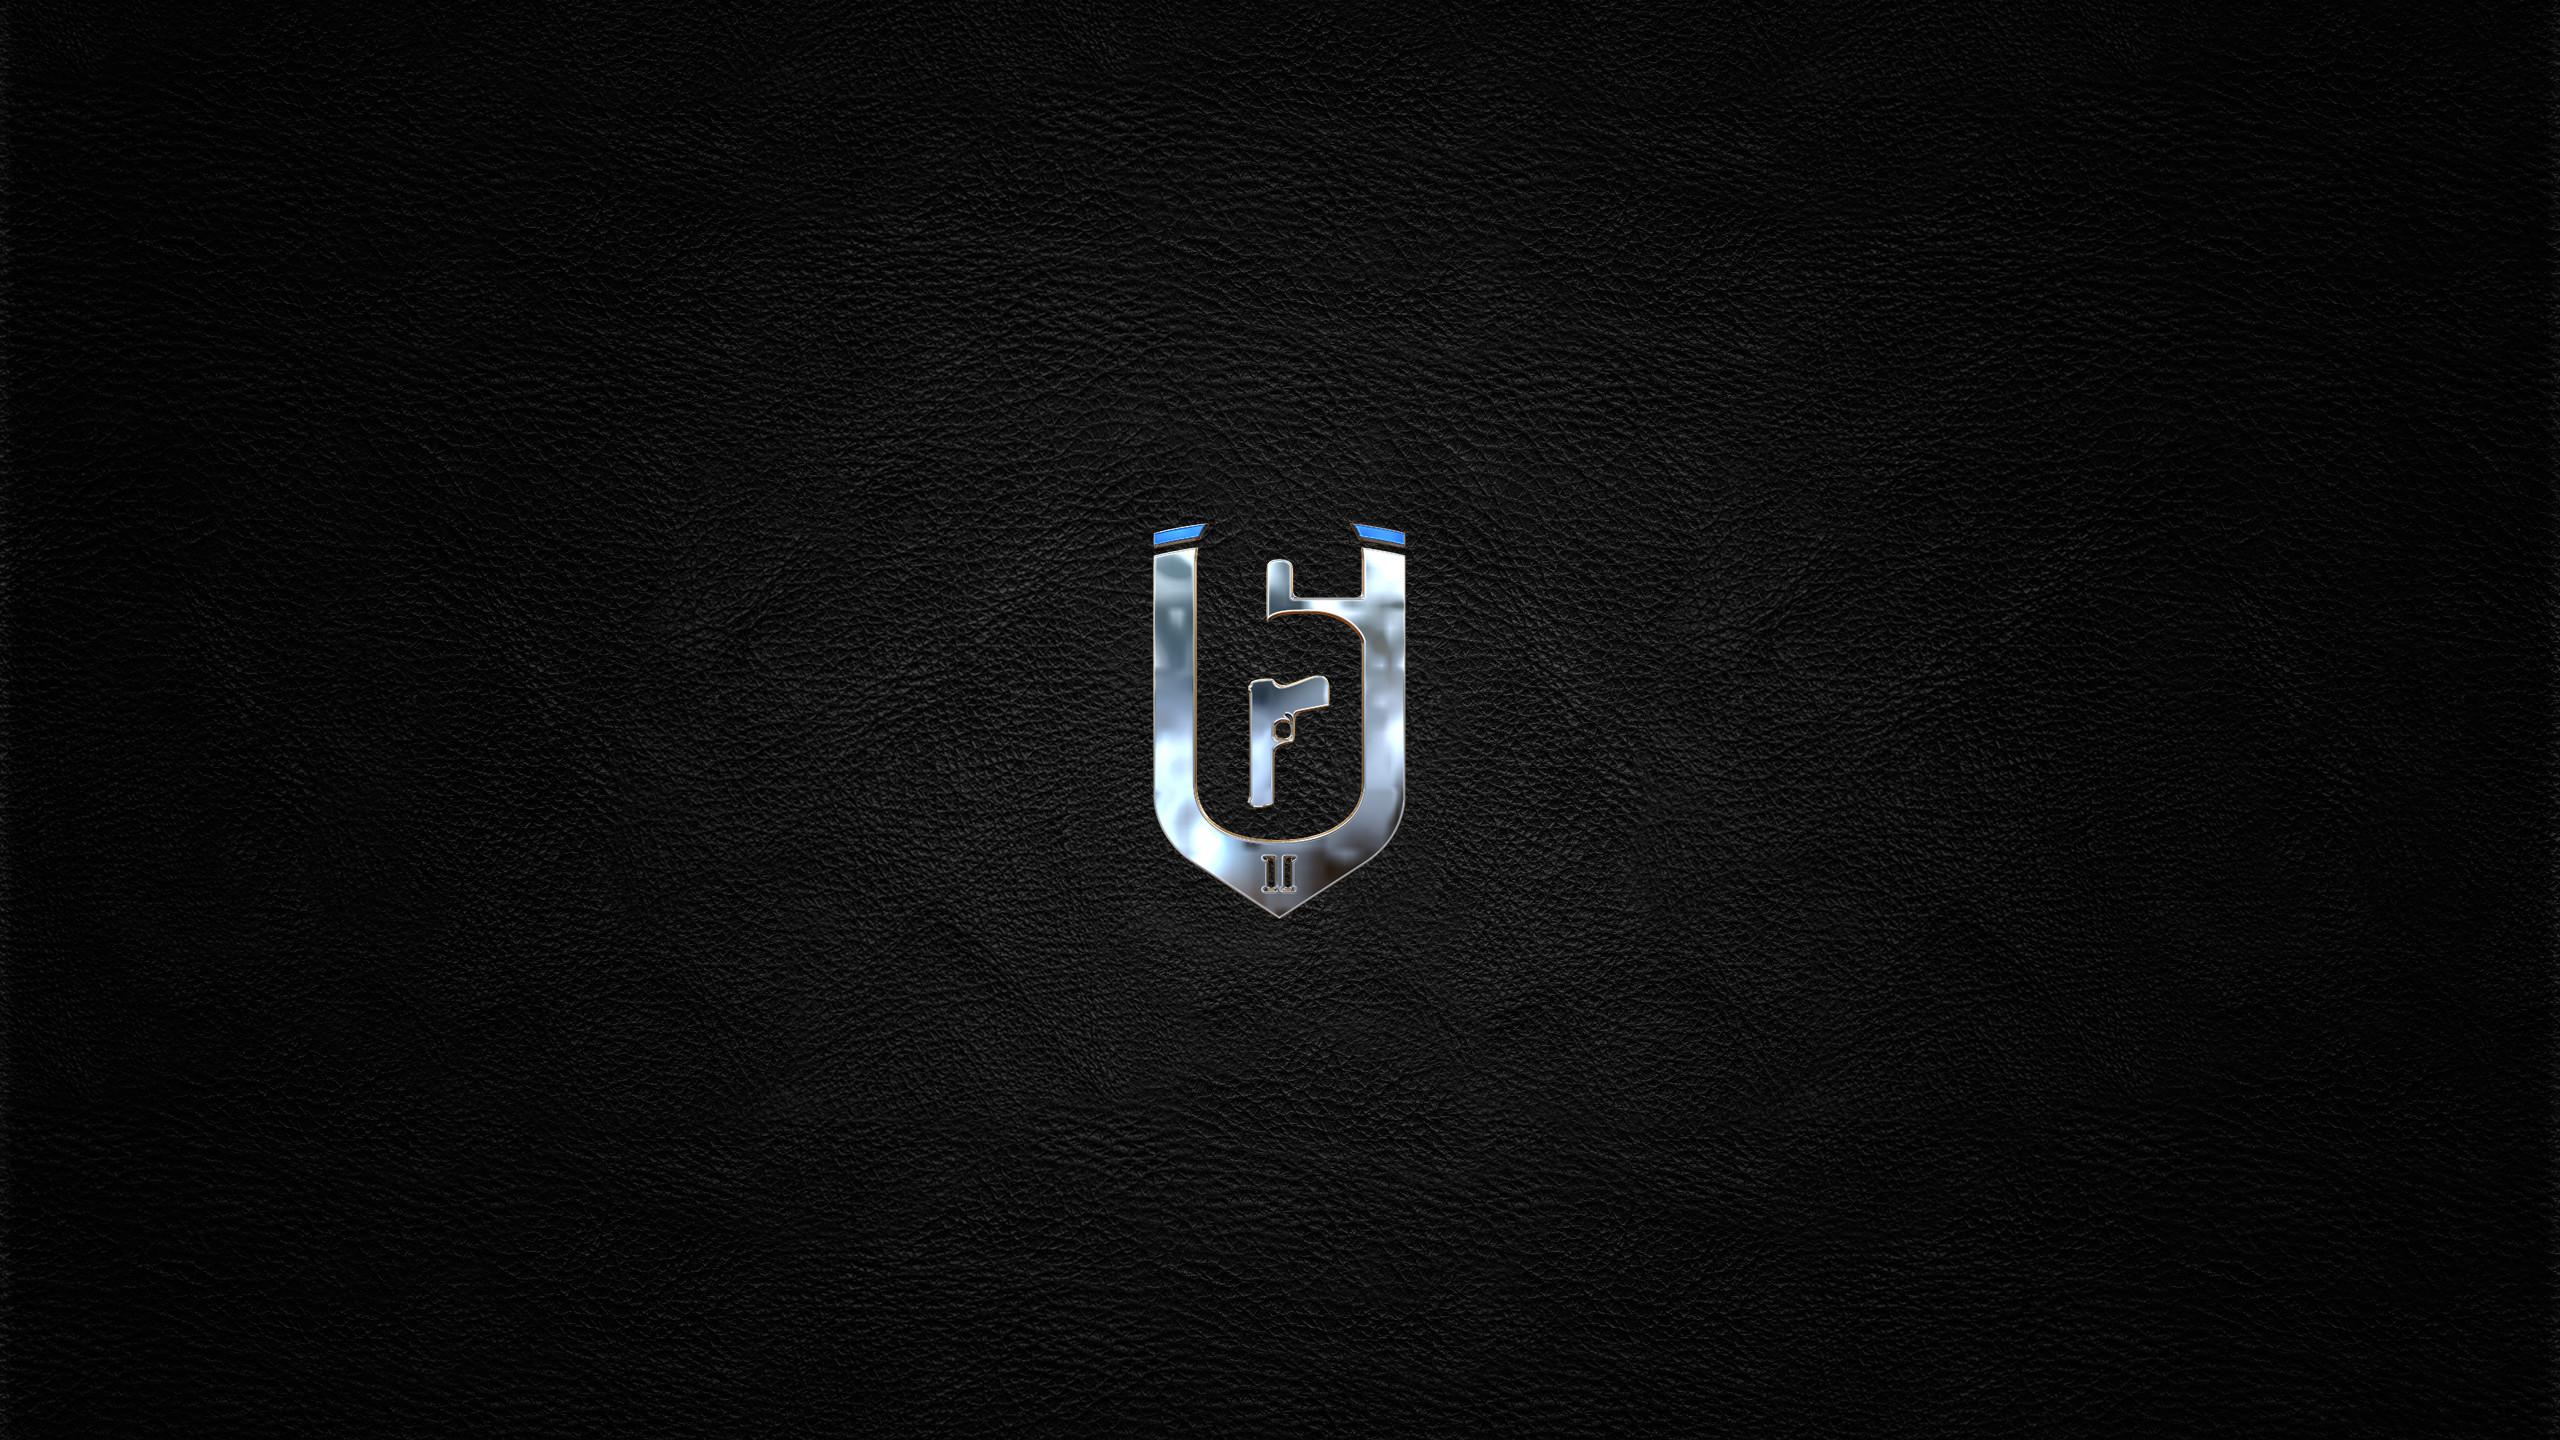 Rainbow Six Siege Wallpaper background picture